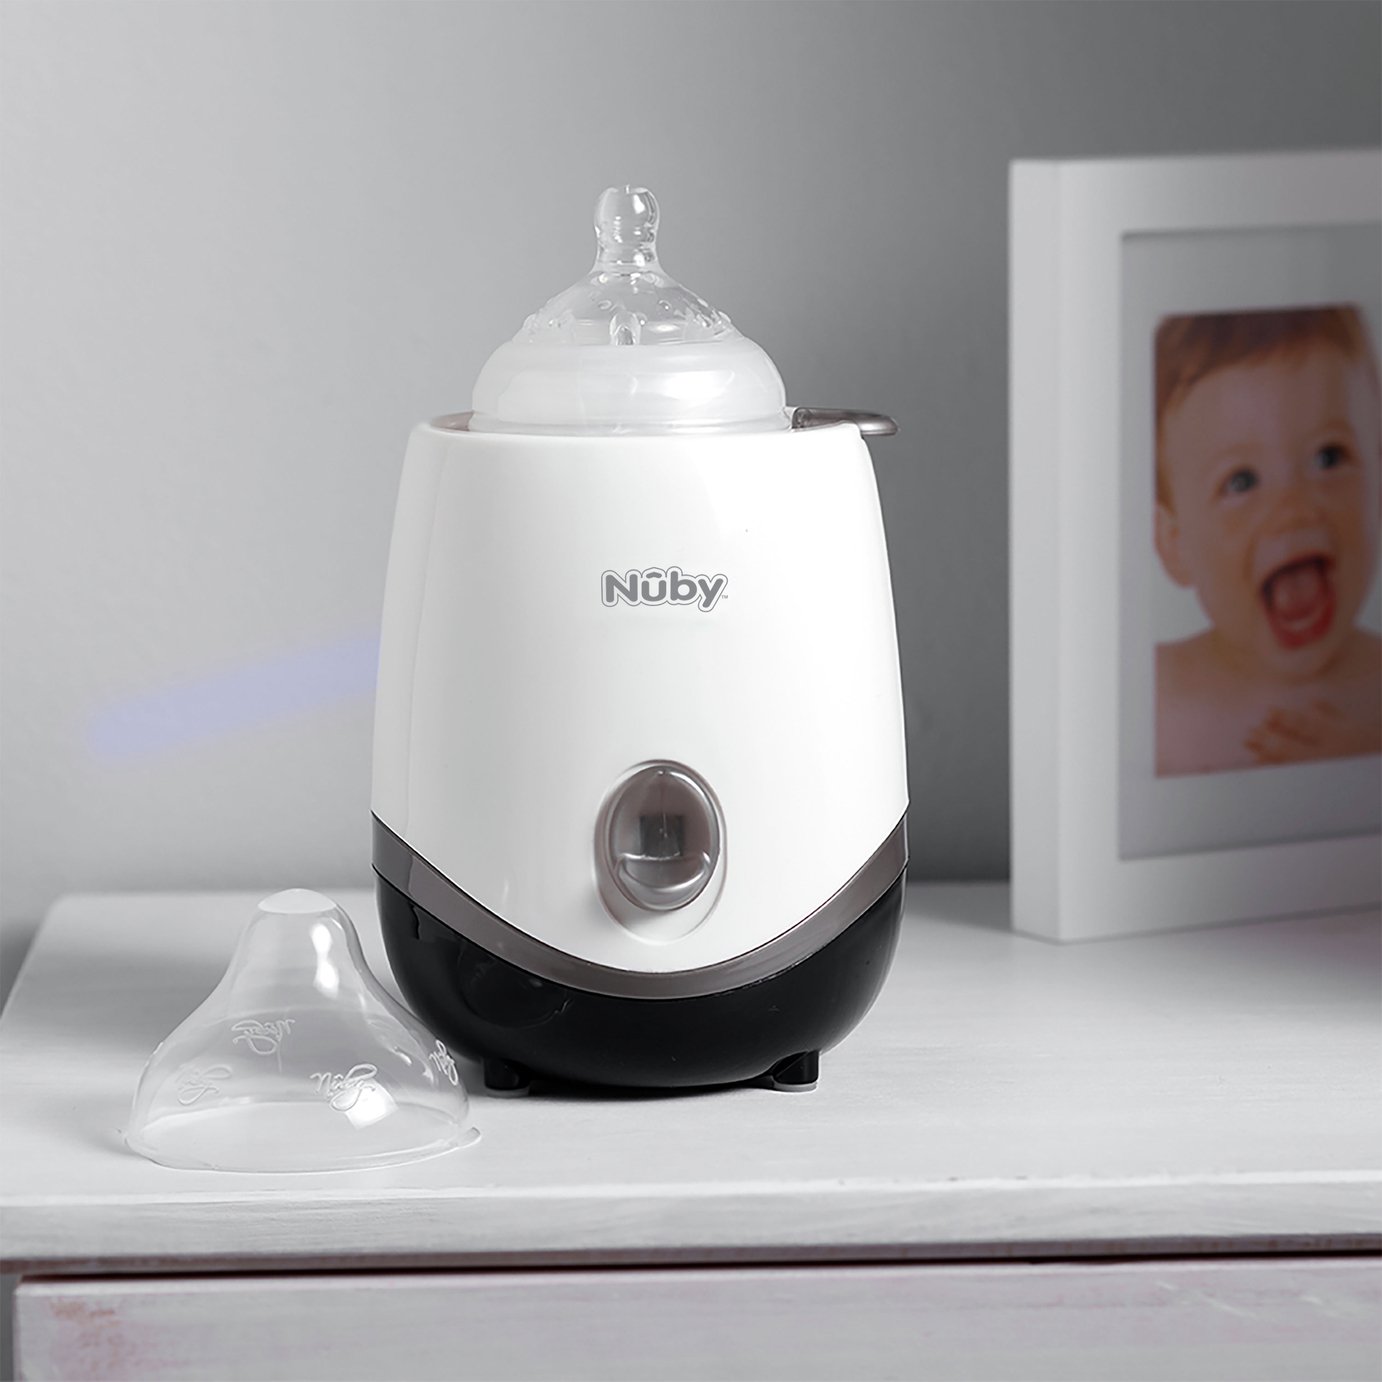 Nuby Electric Baby Bottle and Food Warmer Review